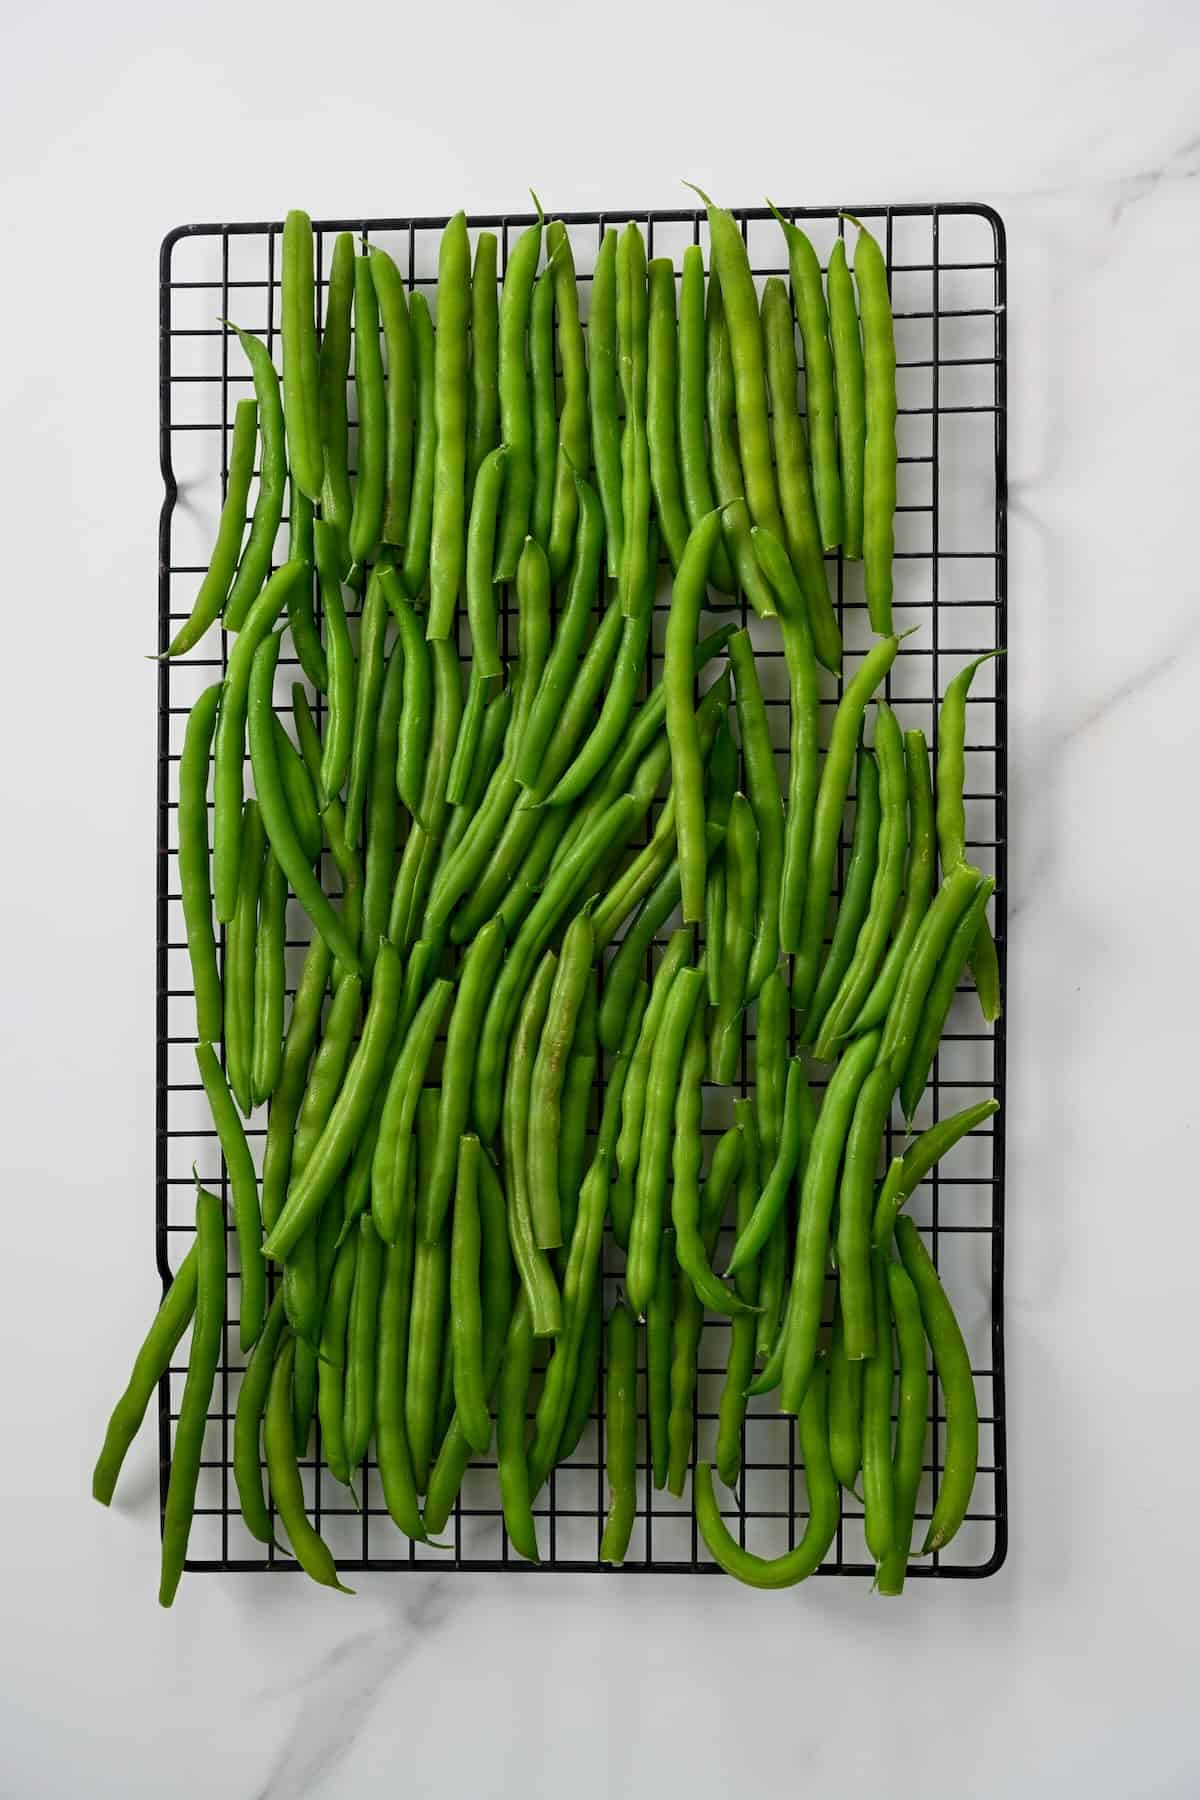 Drying green beans on a rack